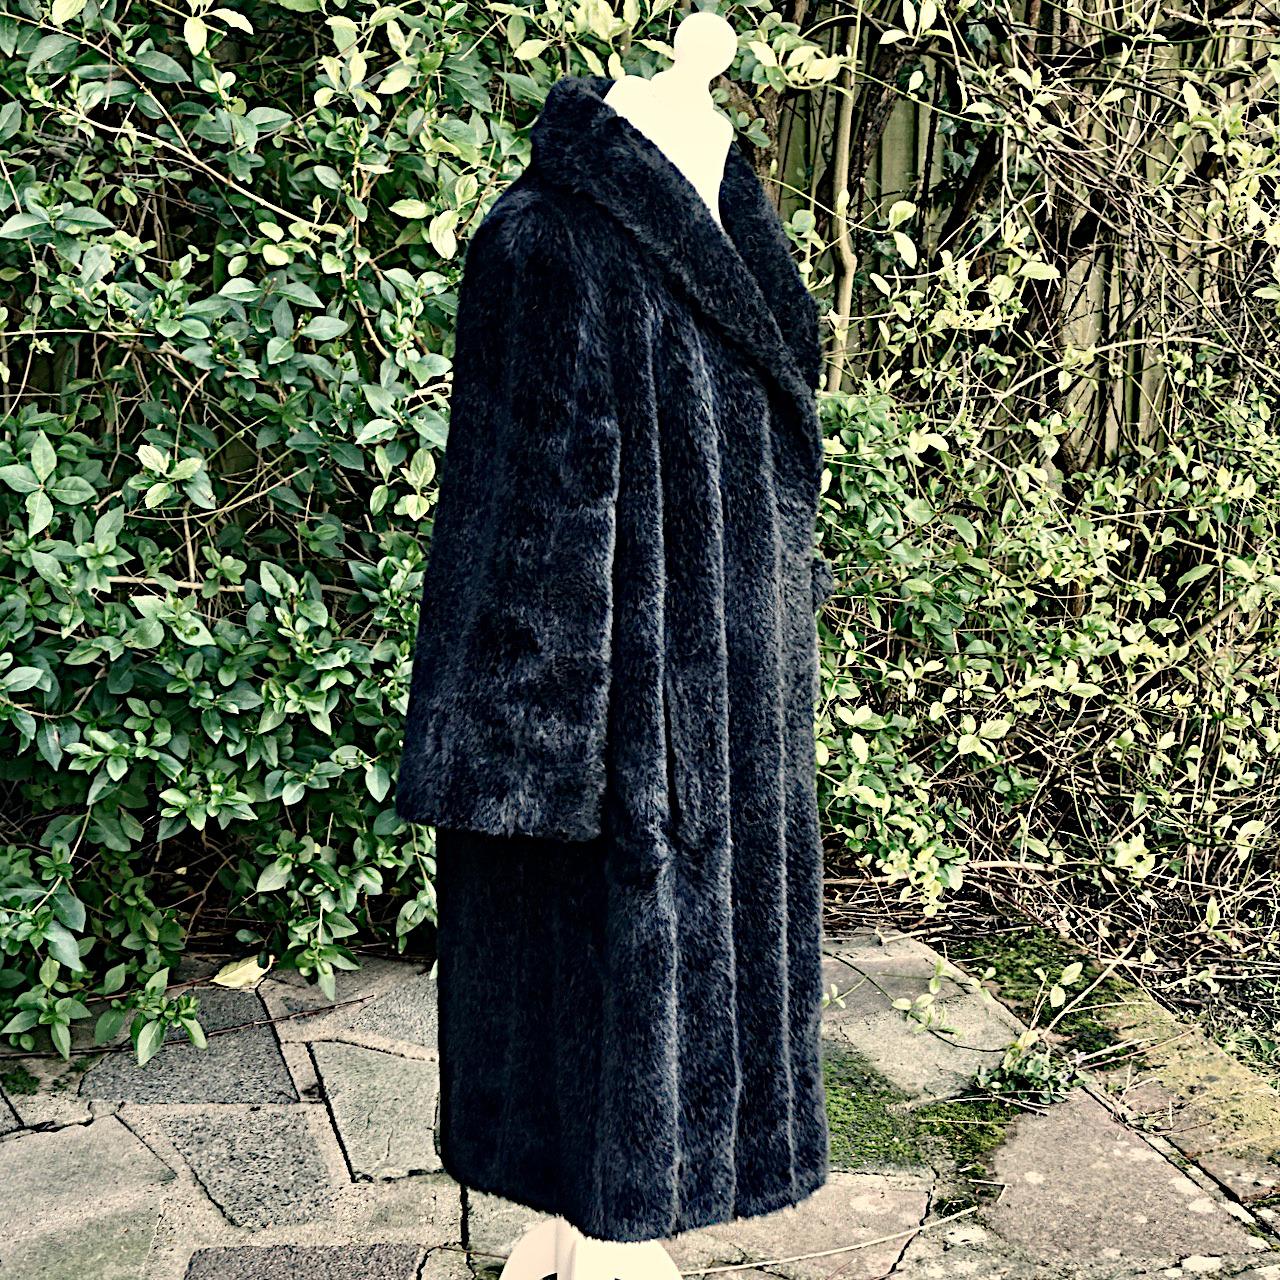 Wonderful black Grevelour Princesse faux fur coat, with three quarter length sleeves and a large faux fur button closure. It is fully lined with black satin, and has a ribbon and loop to hold the closed coat in place. There are two side pockets. The